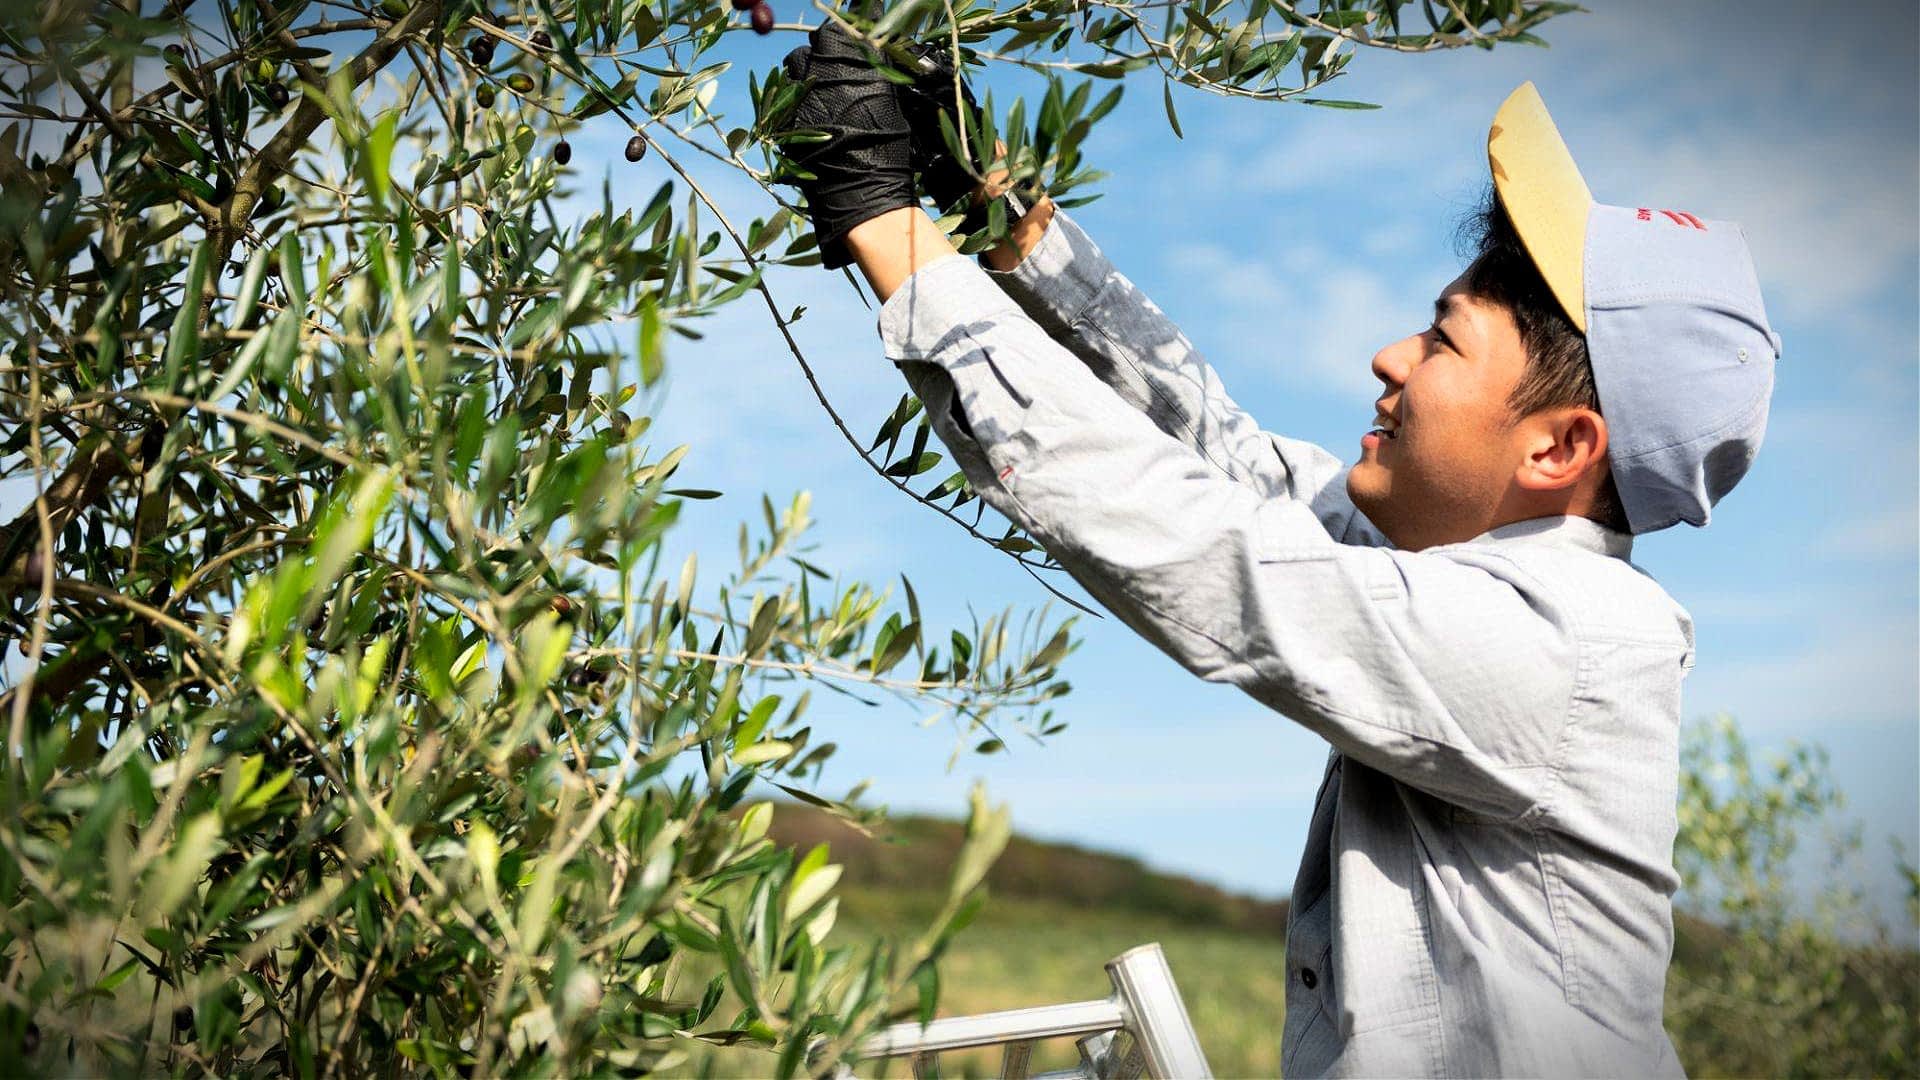 profiles-the-best-olive-oils-production-asia-how-an-experimental-farm-in-japan-gave-rise-to-awardwinning-olive-oil-olive-oil-times